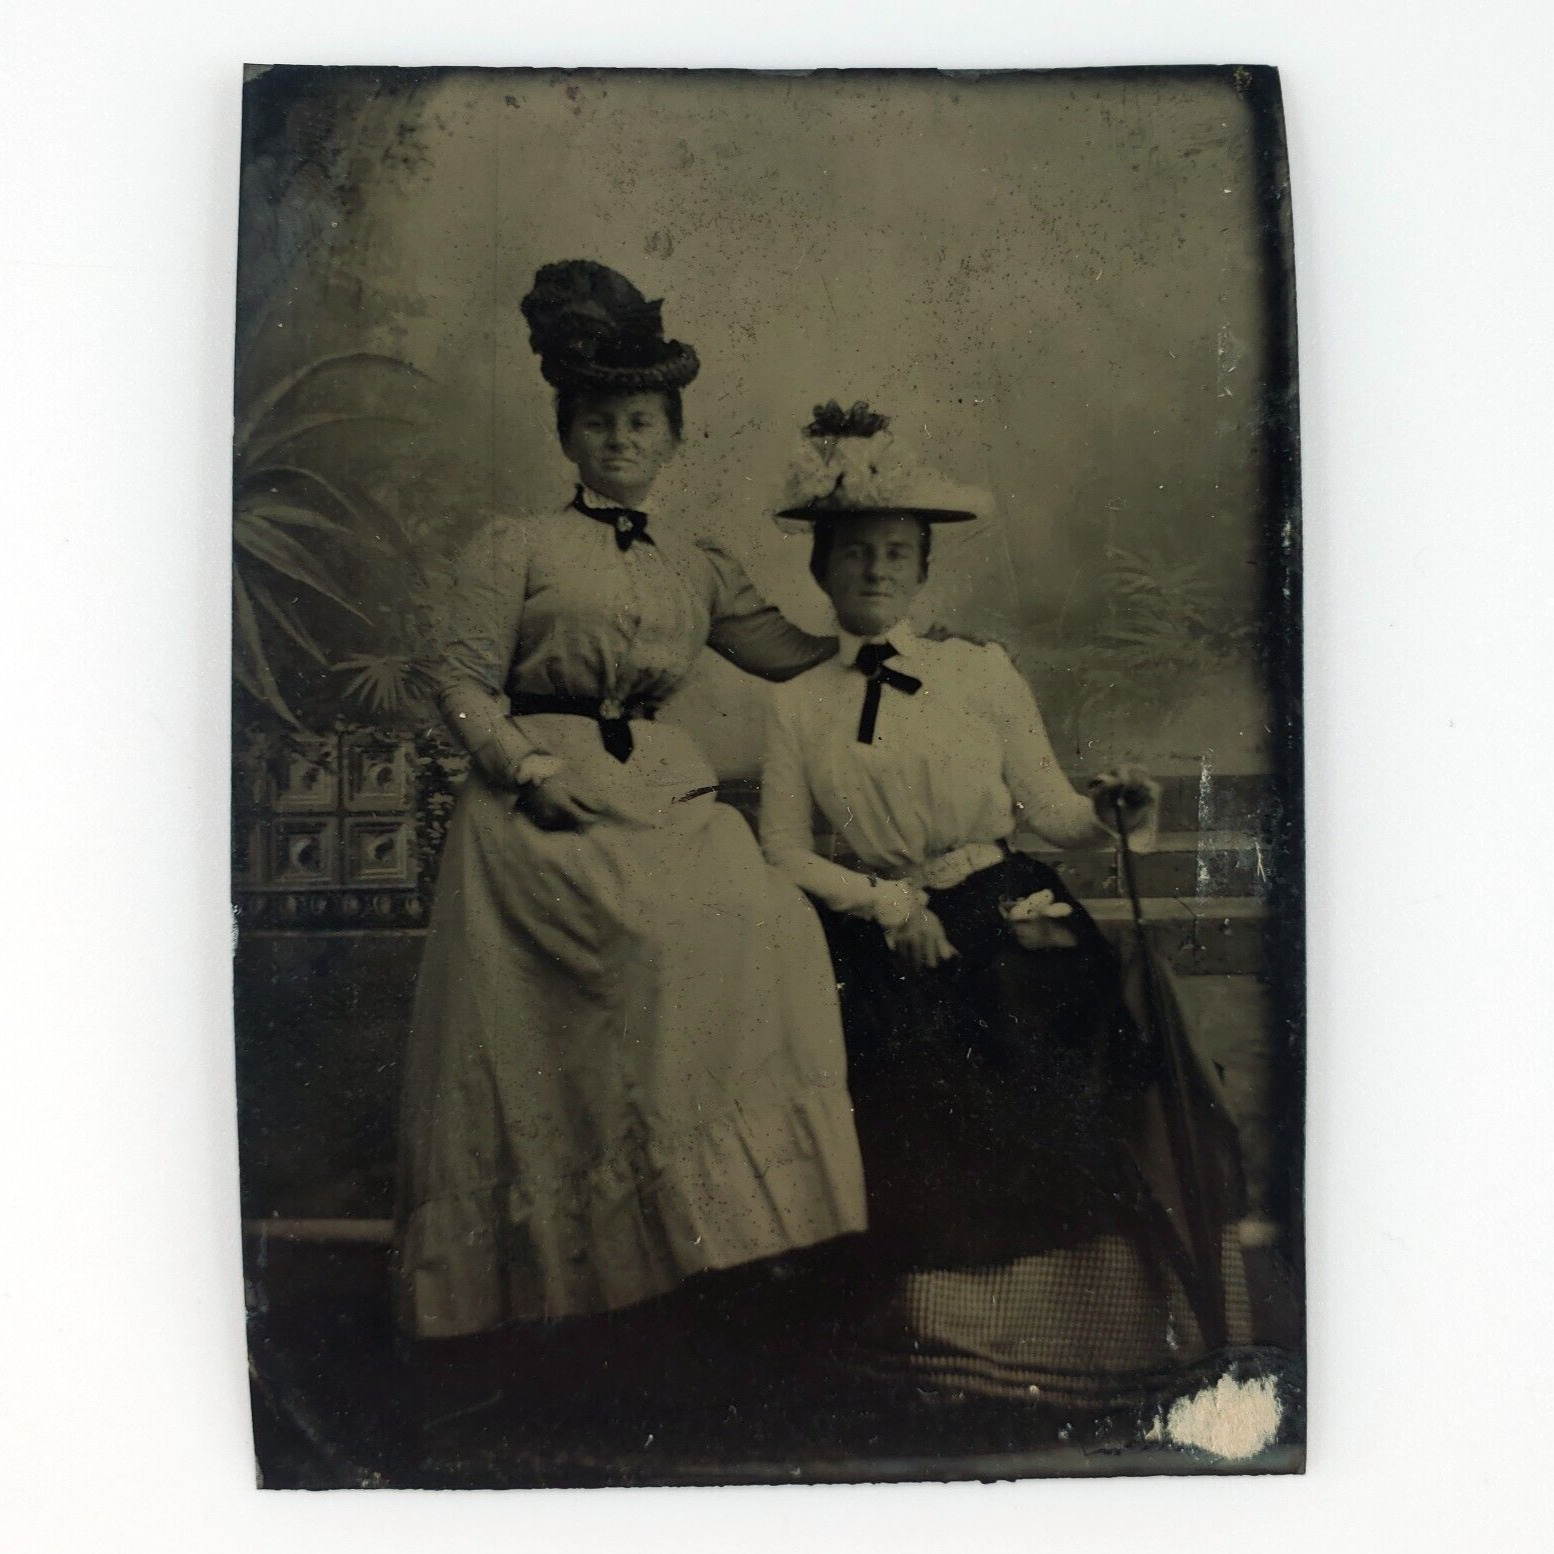 Affectionate Girls Holding Parasol Tintype c1870 Antique 1/6 Plate Photo A3723